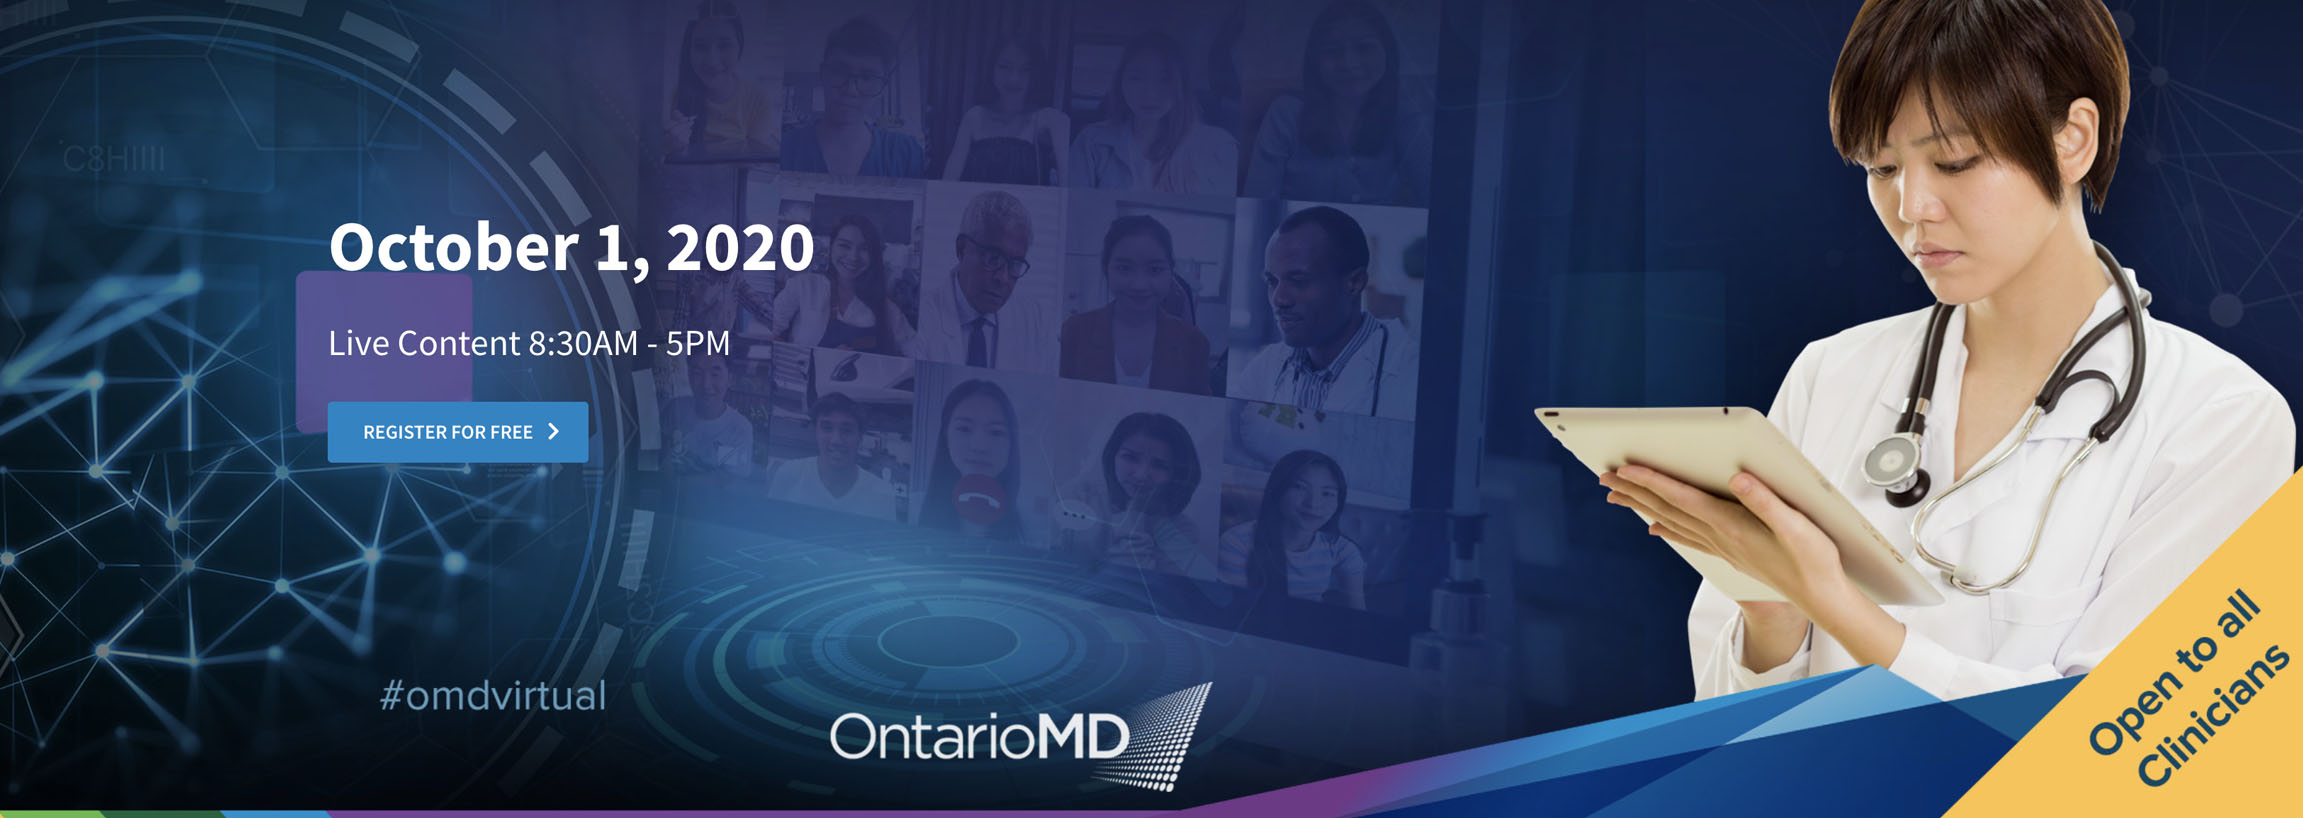 OntarioMD's virtual conference is on October 1, 2020 from 8:30 AM to 5 PM